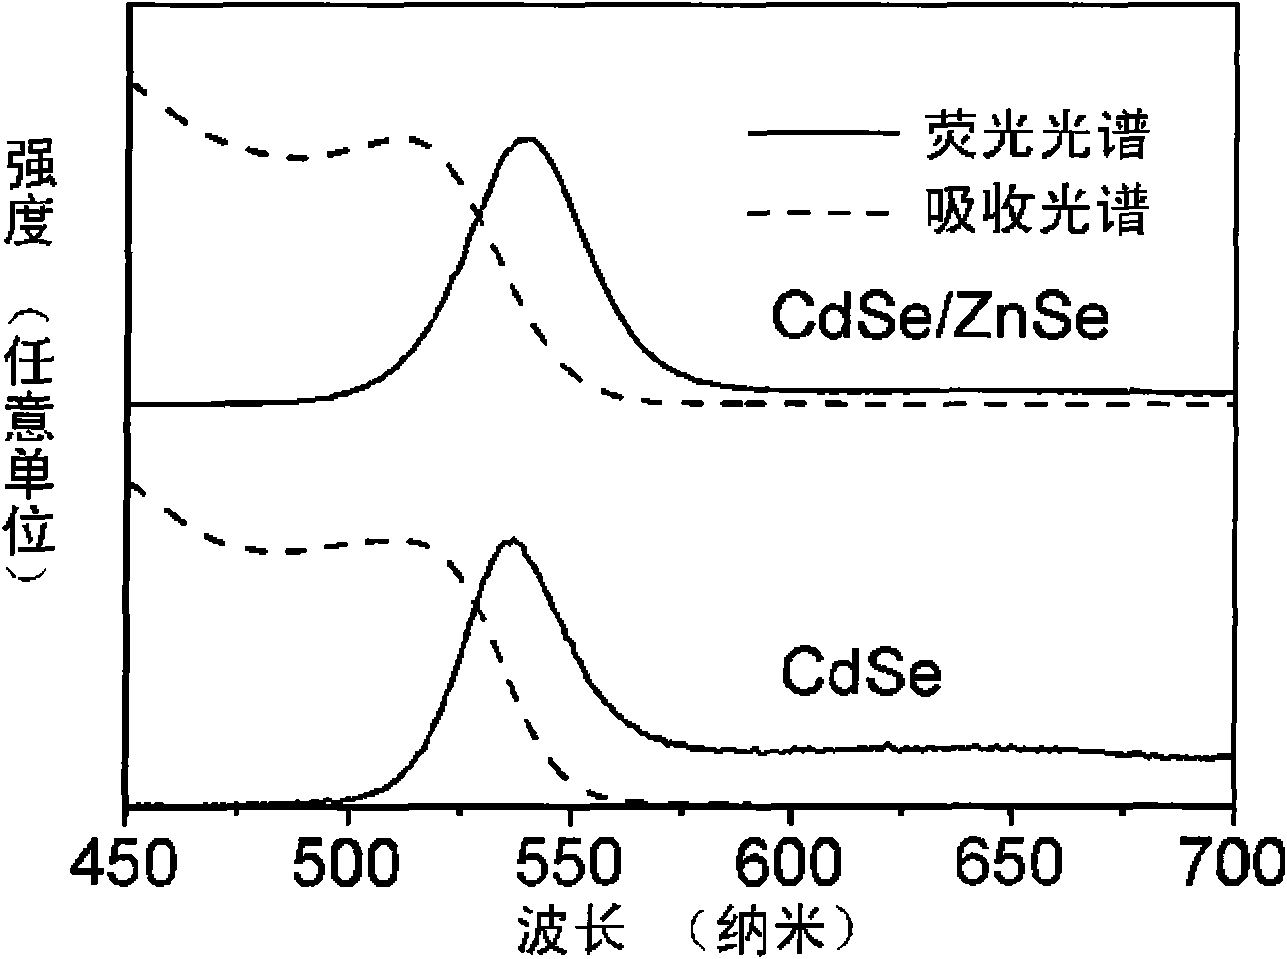 Prepartion method of CdSe and CdSe-ZnSe nuclear shell quantum dots